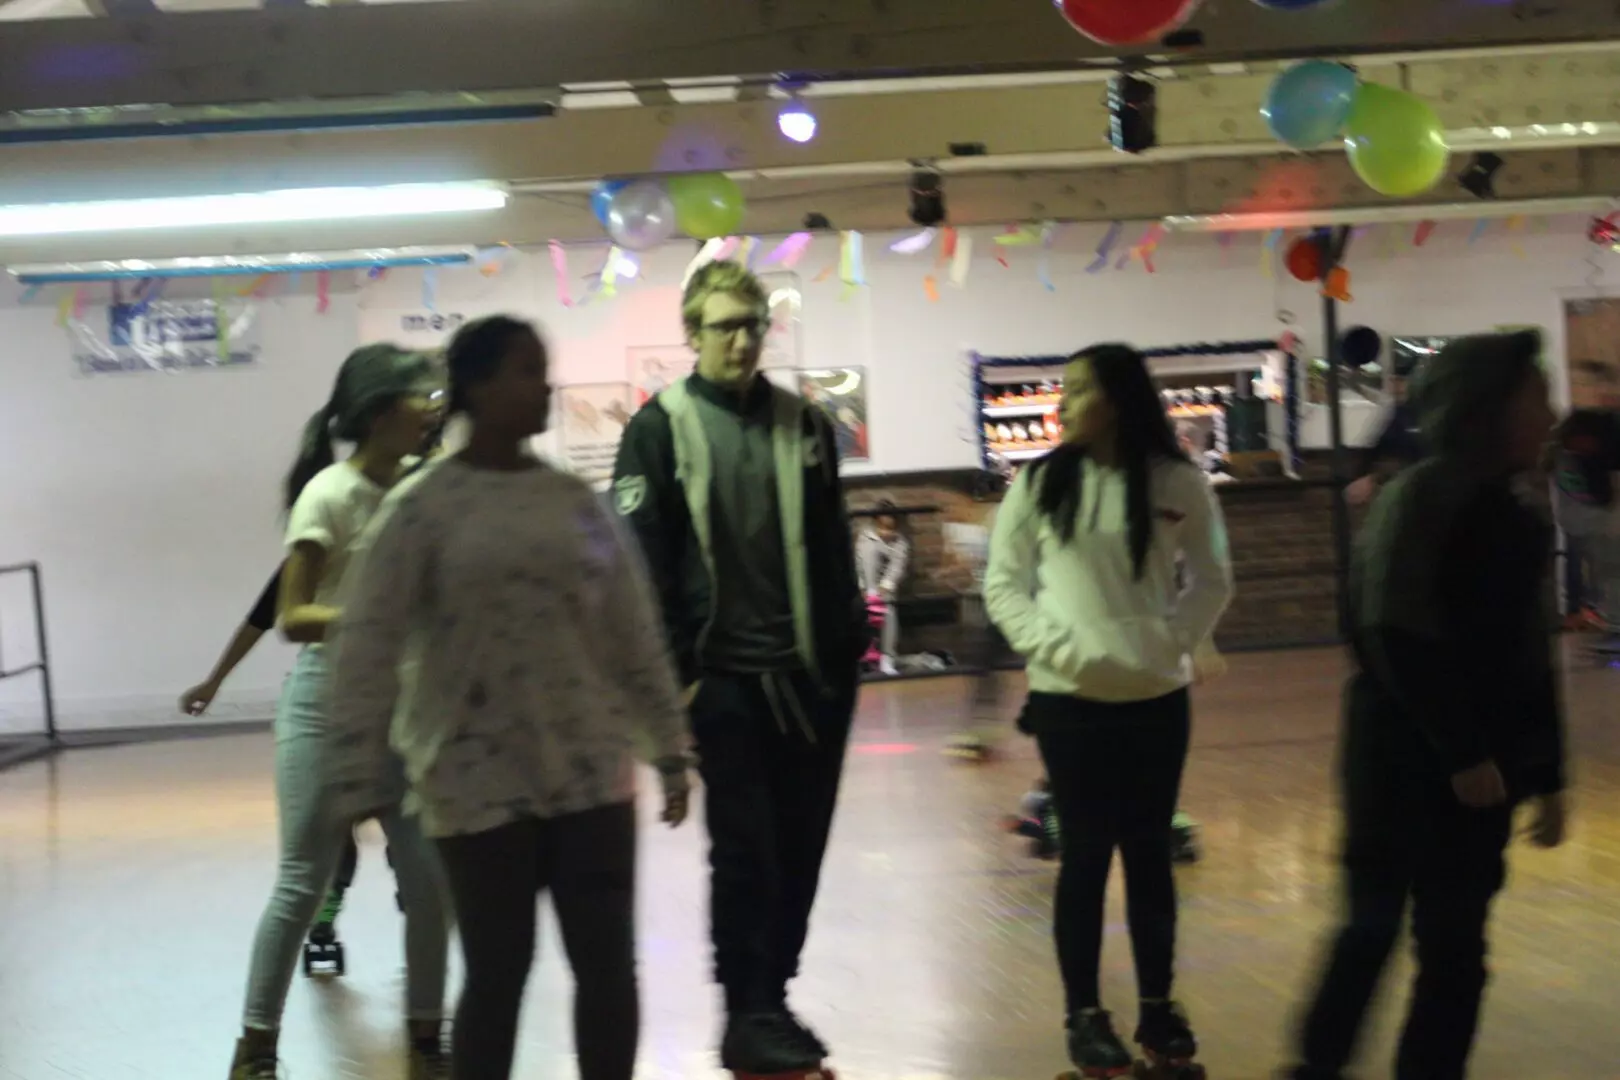 Group of friends strolling and skating on a roller rink